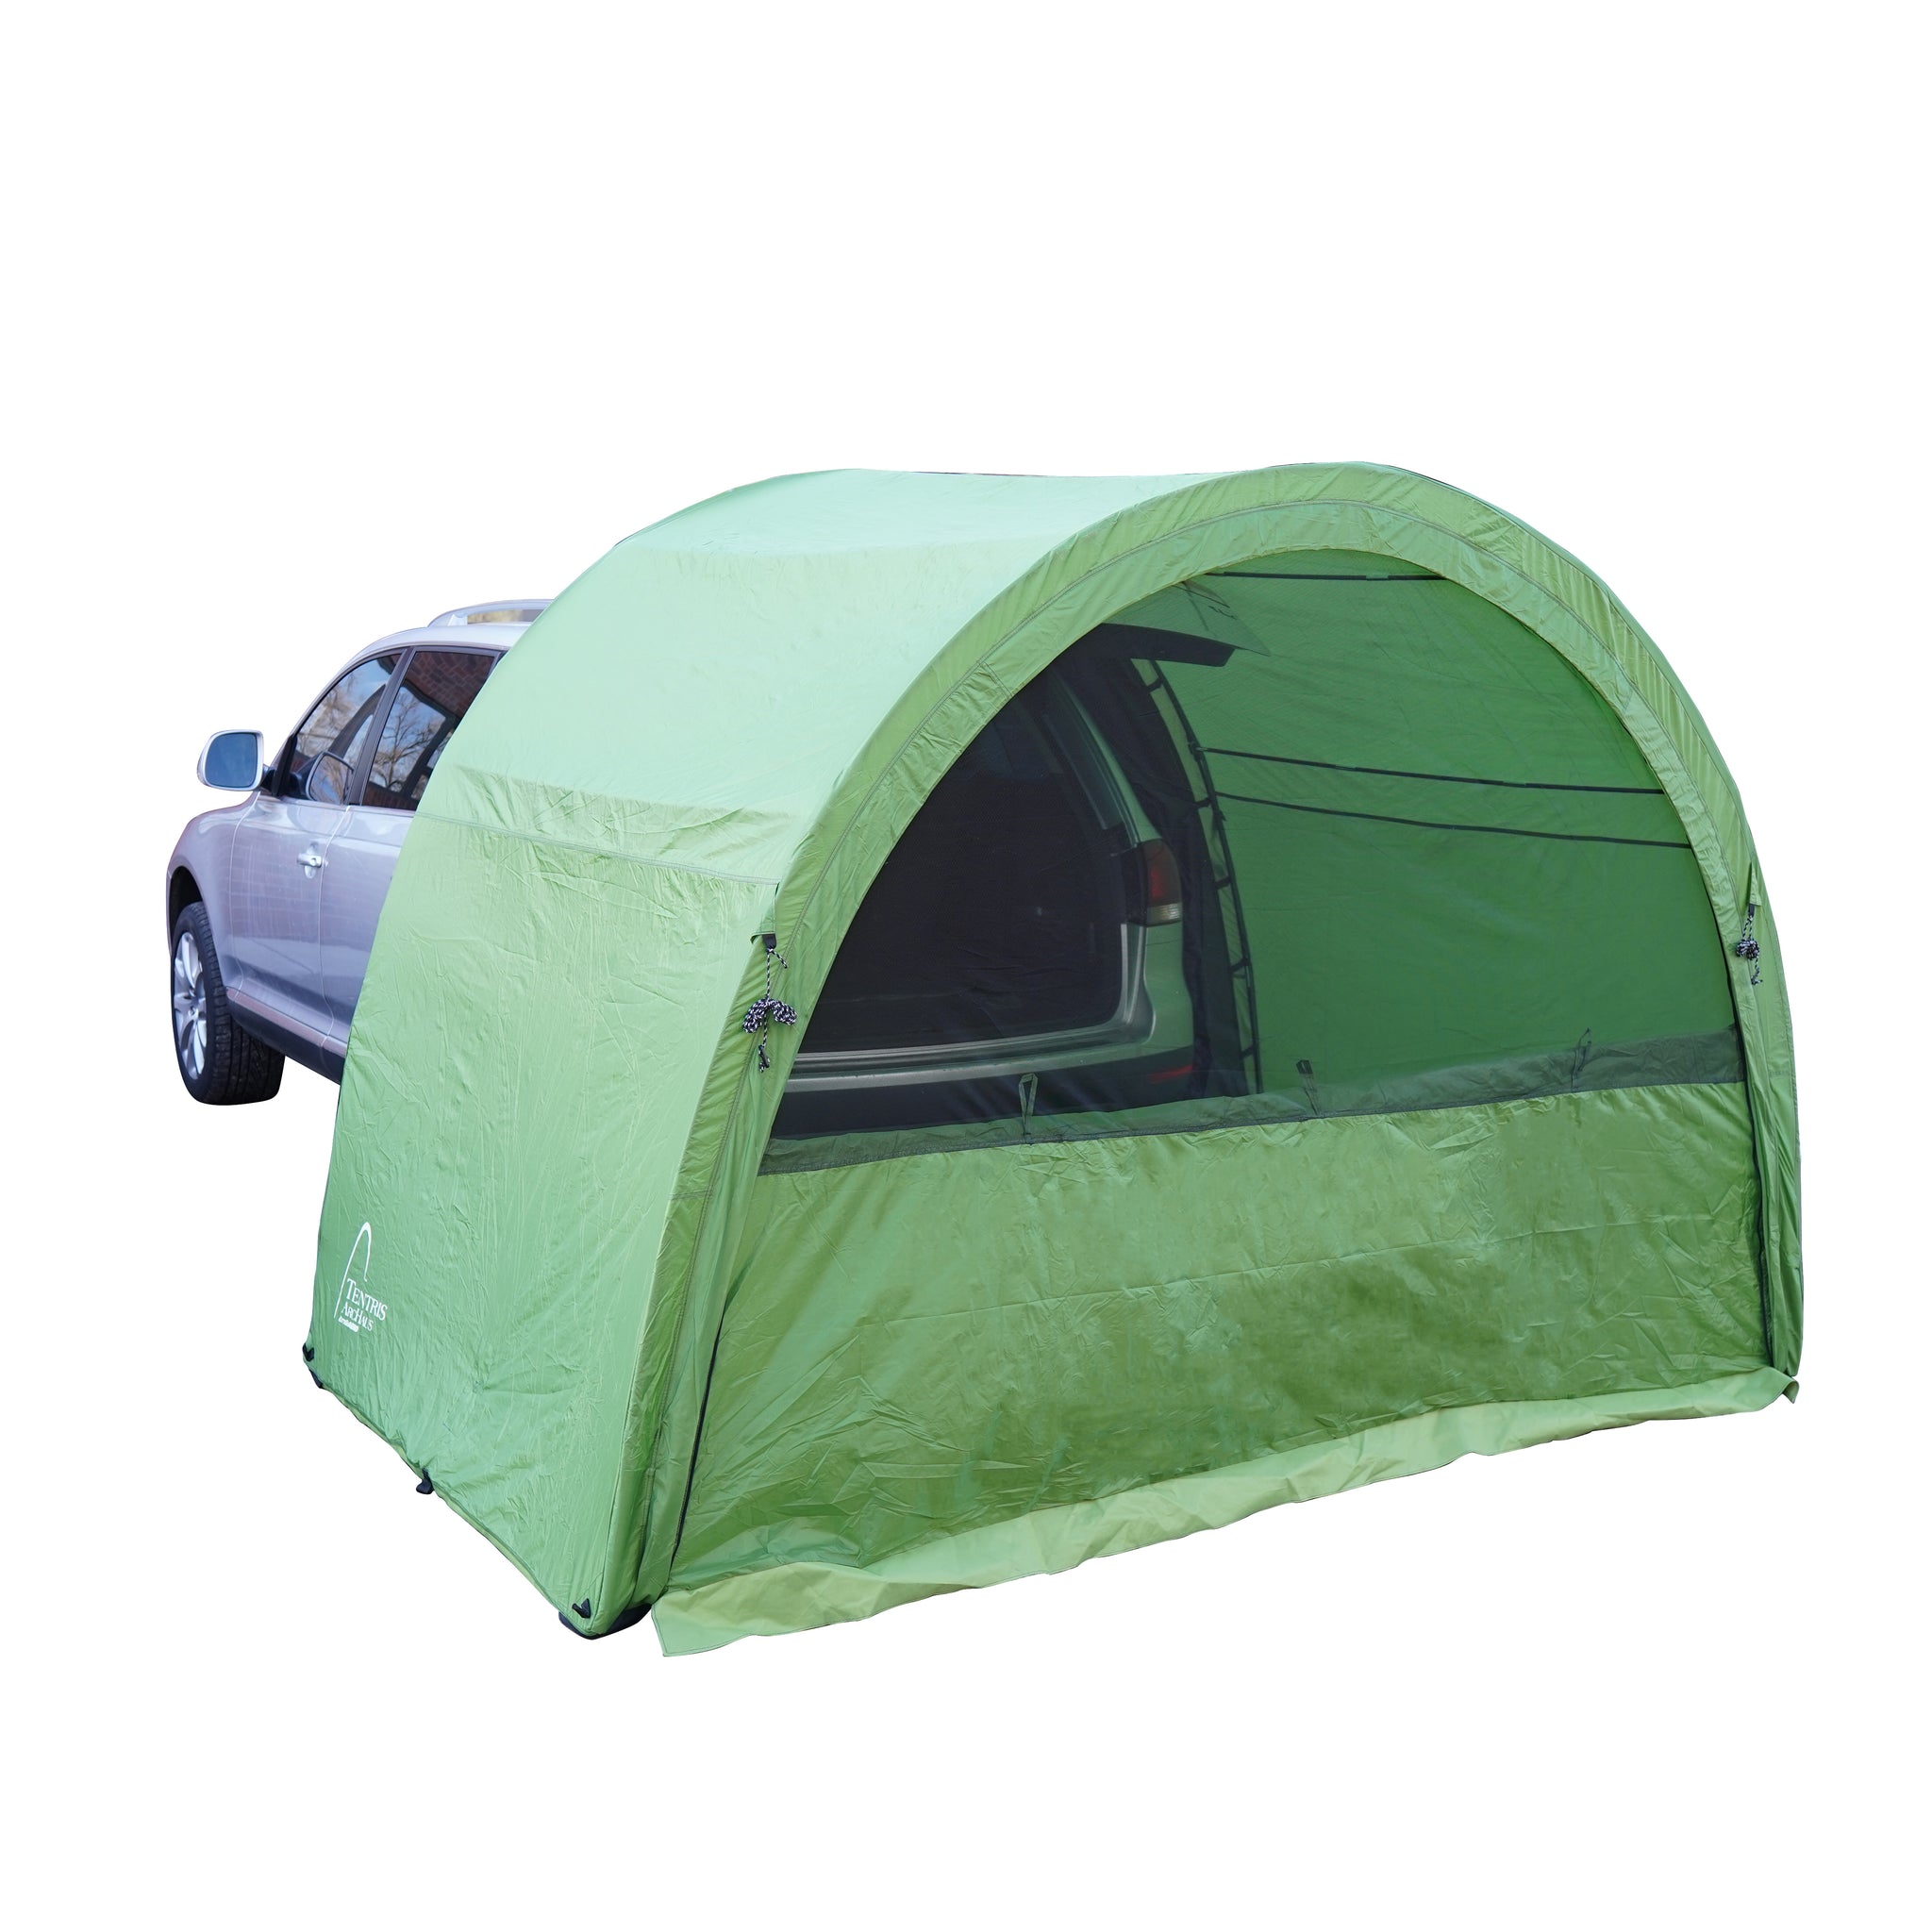 sneeuw campus gebroken ArcHaus Shelter & Tailgate Tent | Tentris Shelters | Let's Go Aero